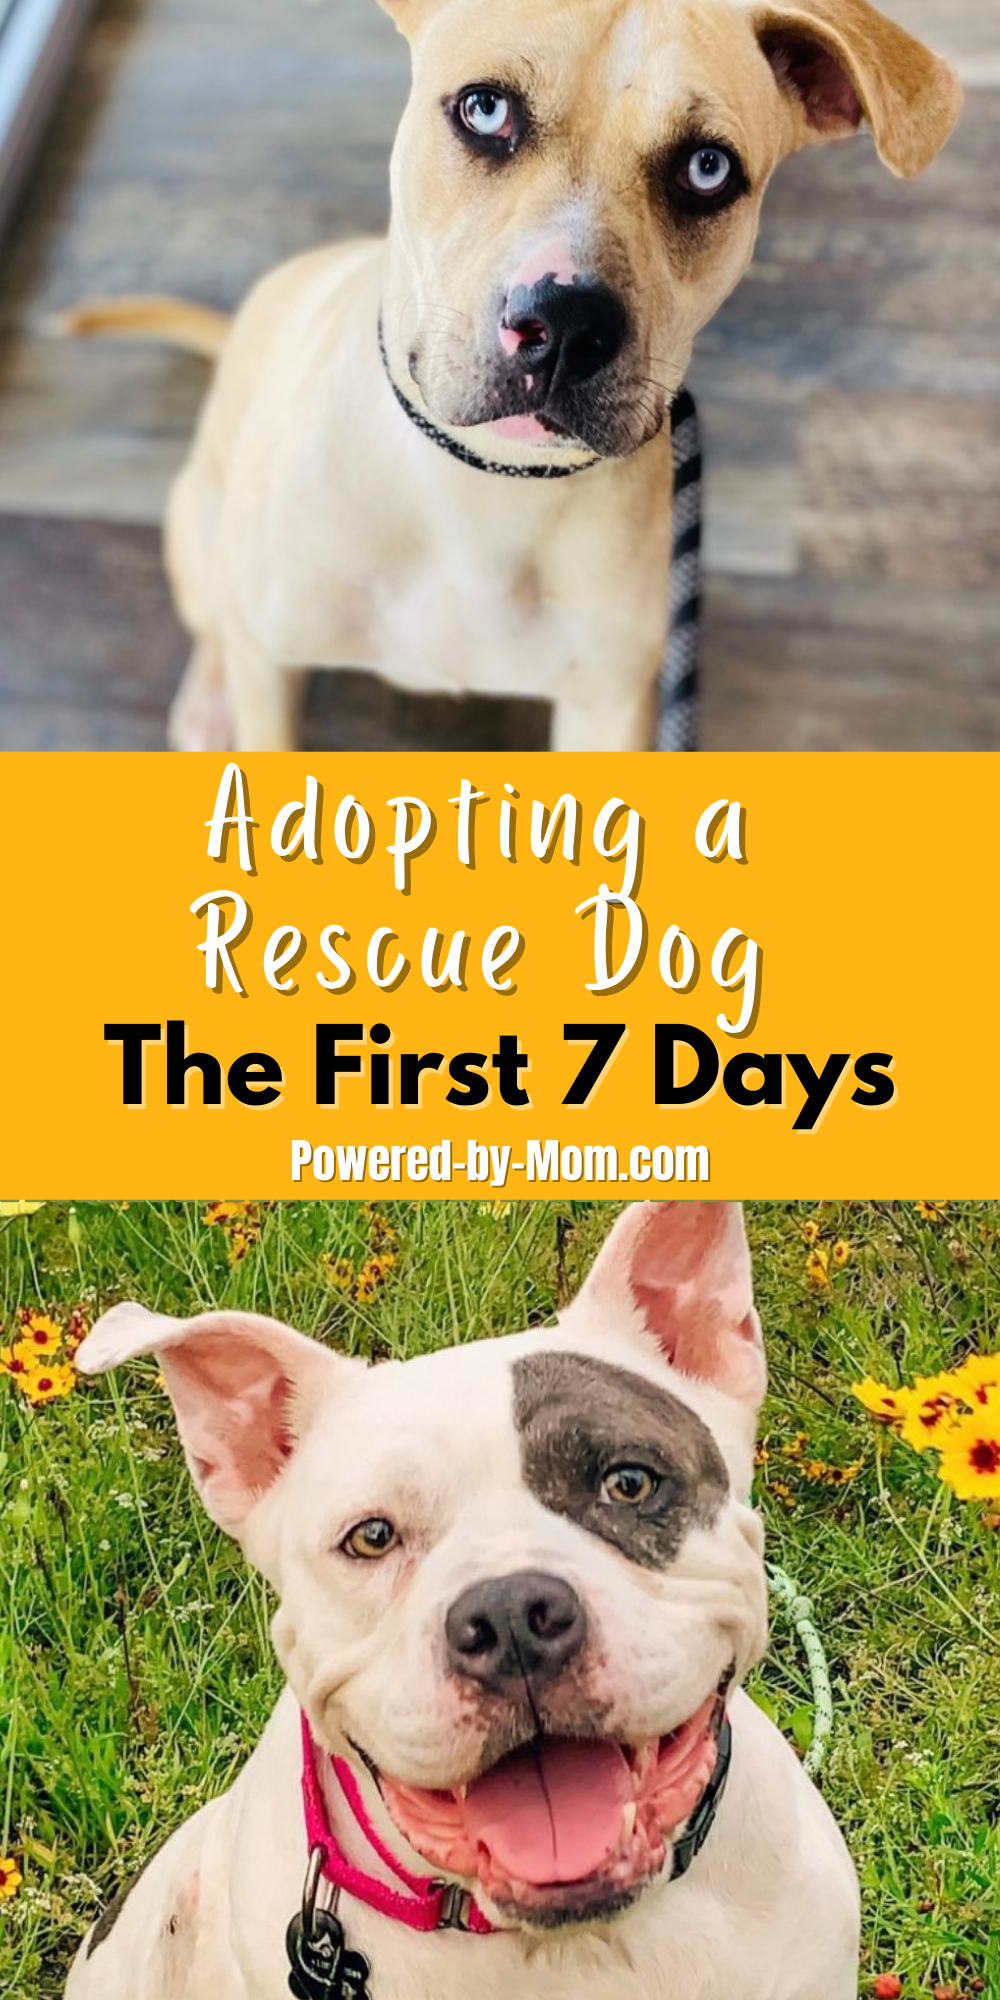 If you are adopting a rescue dog, the first seven days are a crucial time for both you and your dog. It will be a period of adjustment.